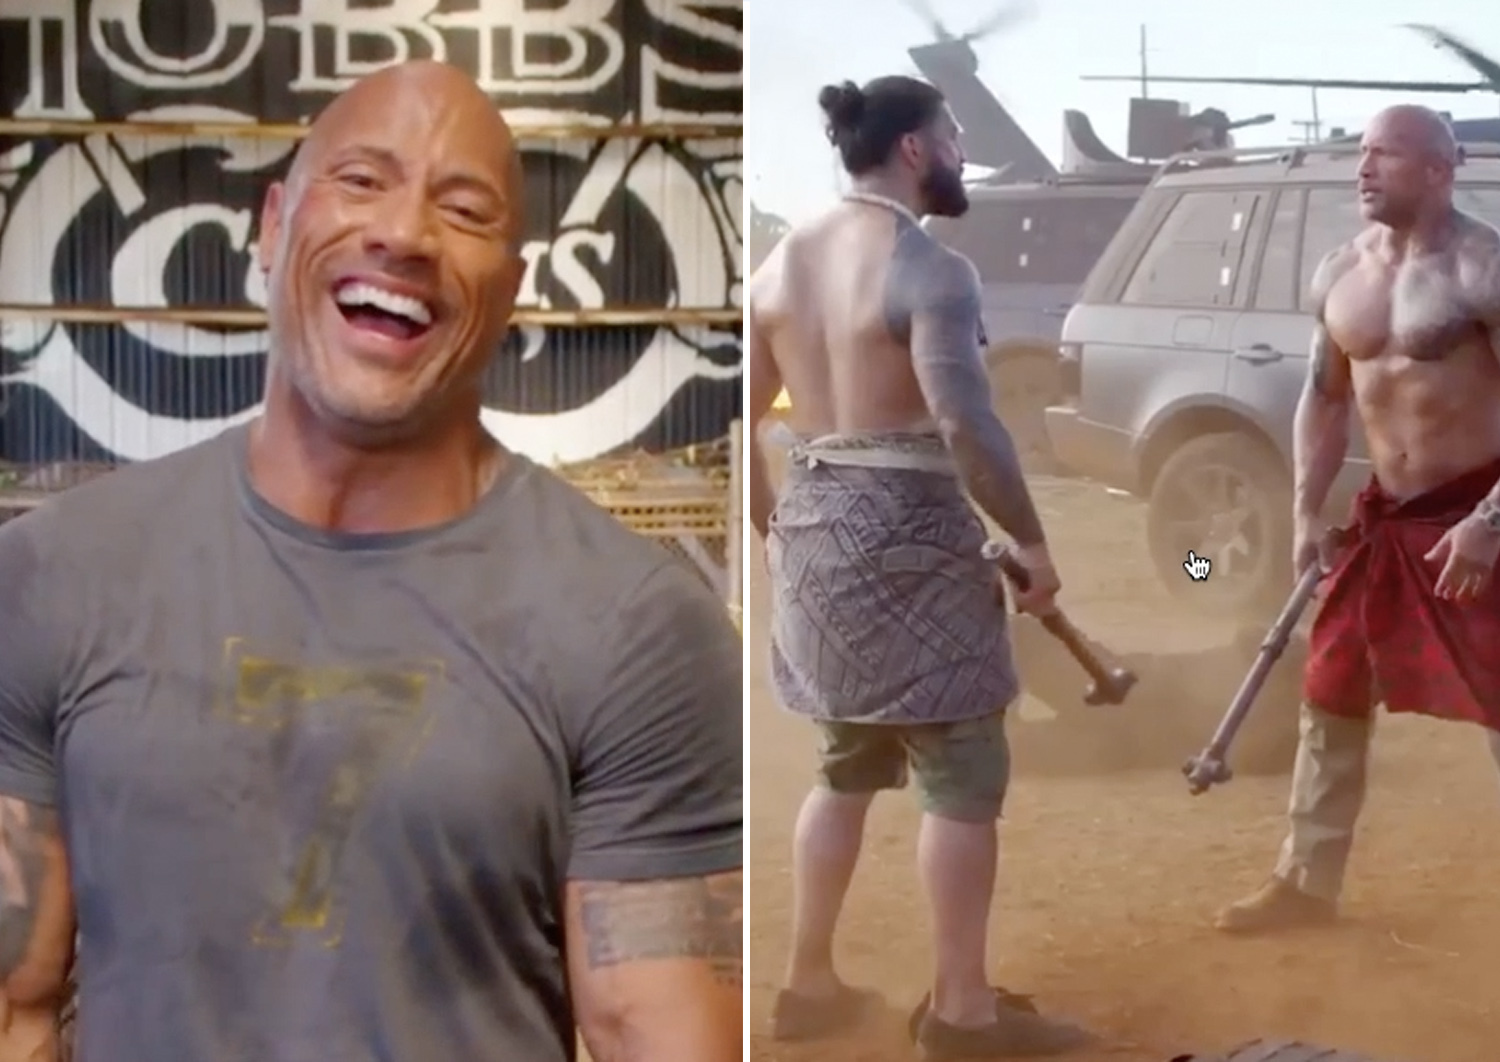 Hobbs and Shaw/